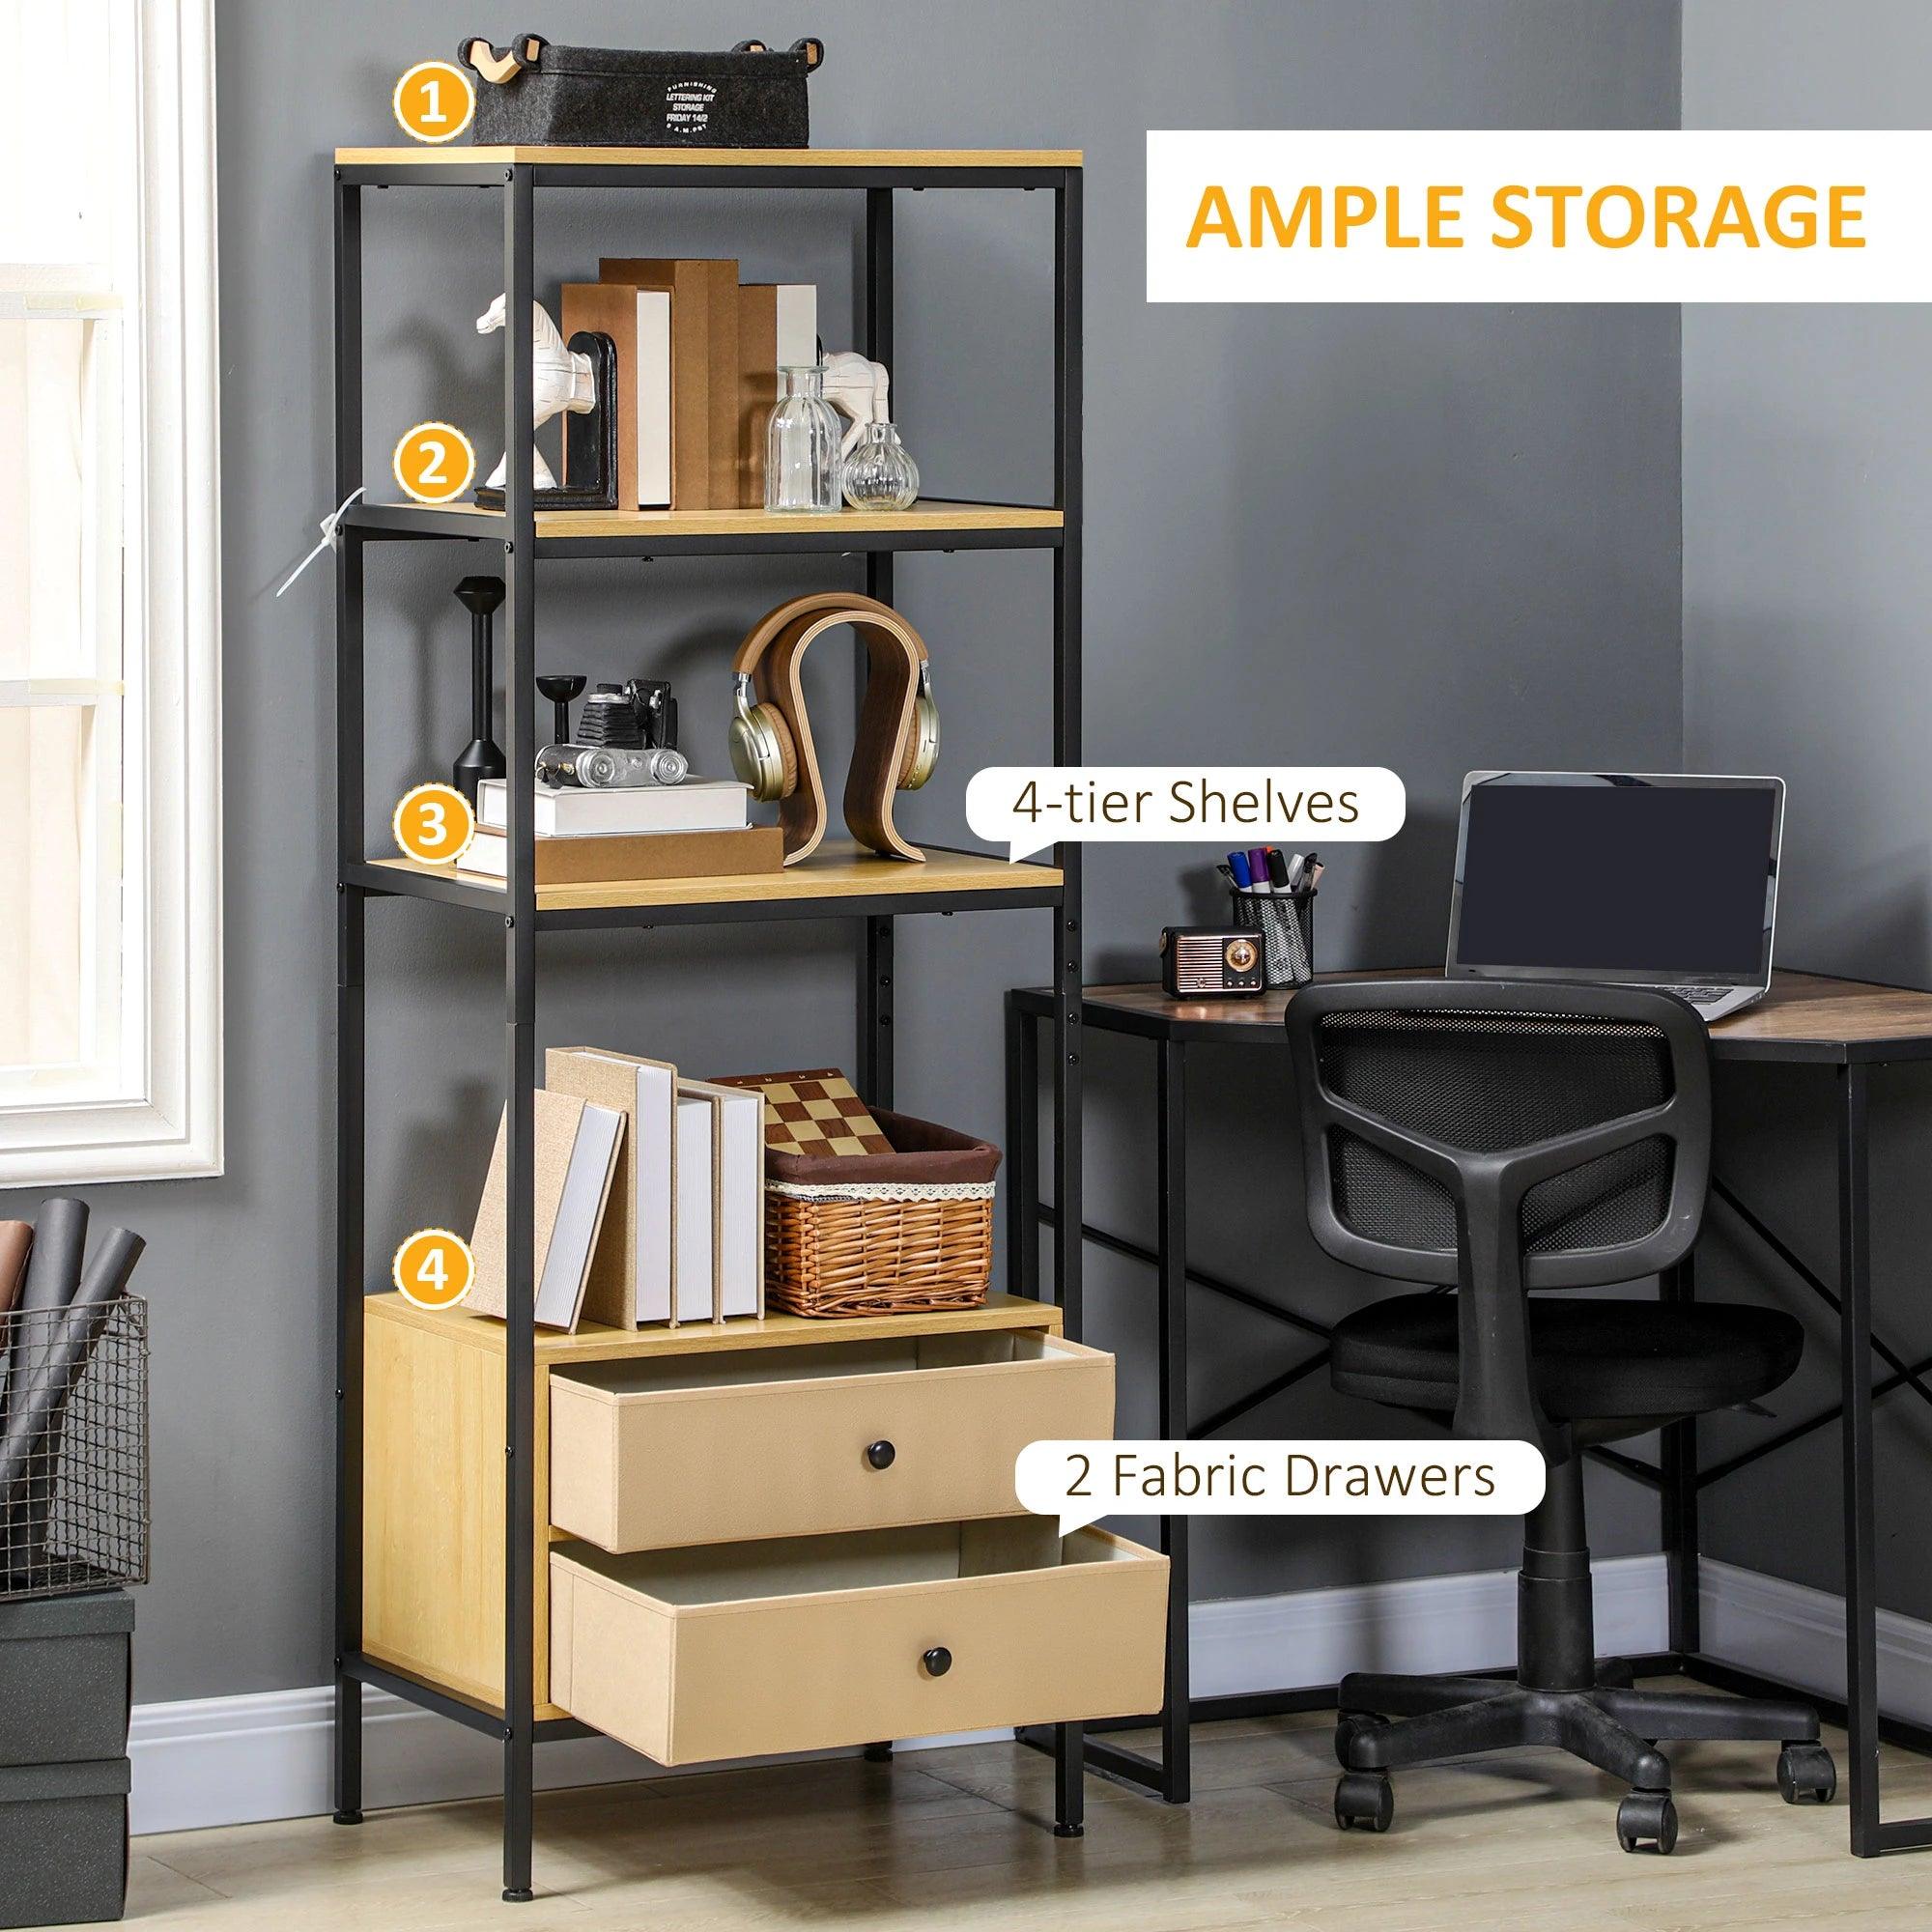 4-tier Storage Shelving Unit with 2 Fabric Drawers, Modern Bookshelf with Open Shelves for Living Room, Home Office, Bedroom, Oak